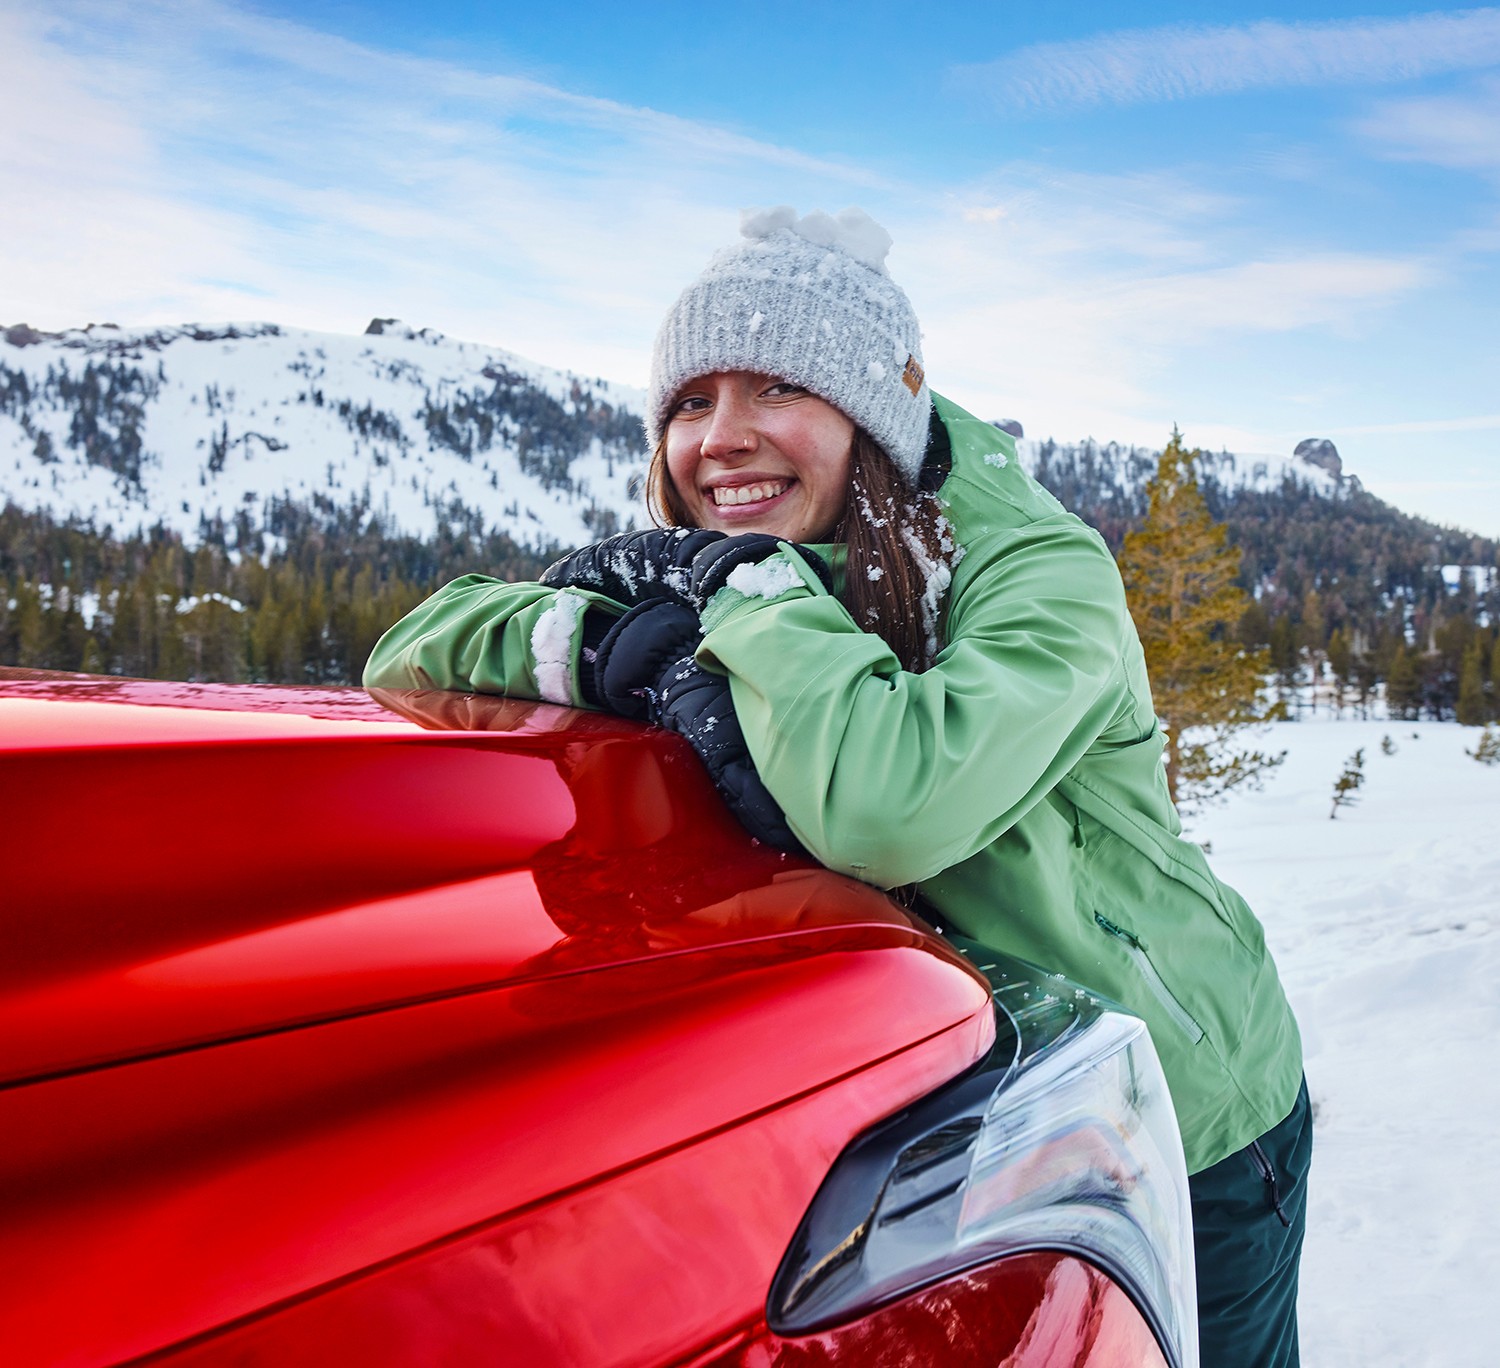 In a scenic winter landscape, a woman leans against the hood of a Toyota vehicle with her head propped on her hands smiling at the camera.